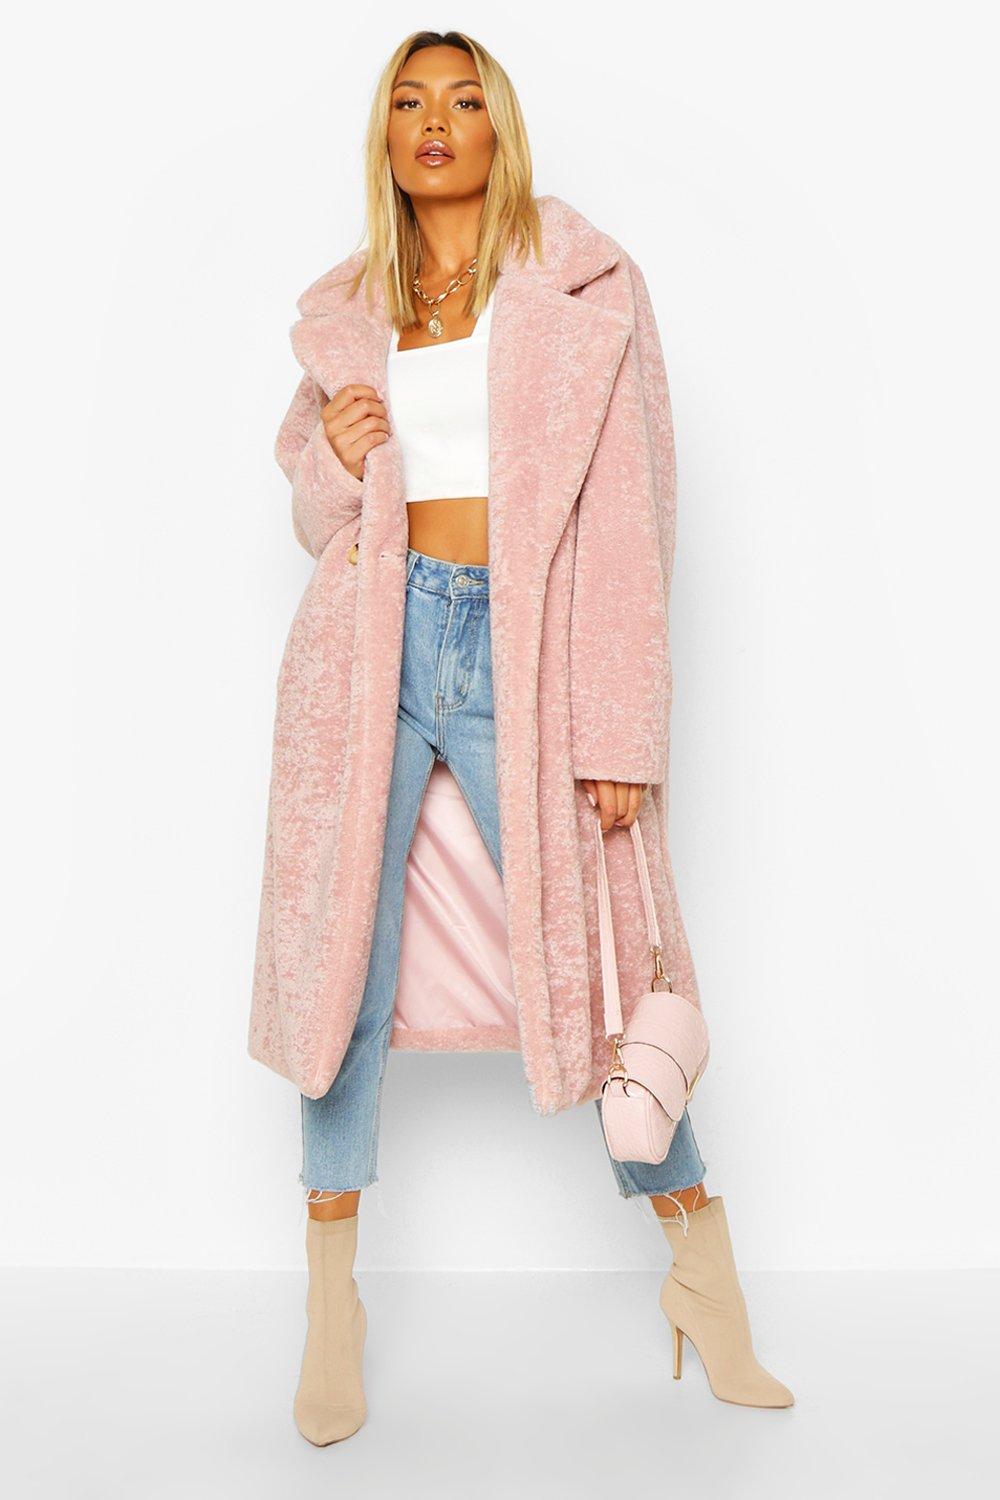 Boohoo Plus Textured Faux Fur Jacket in Natural